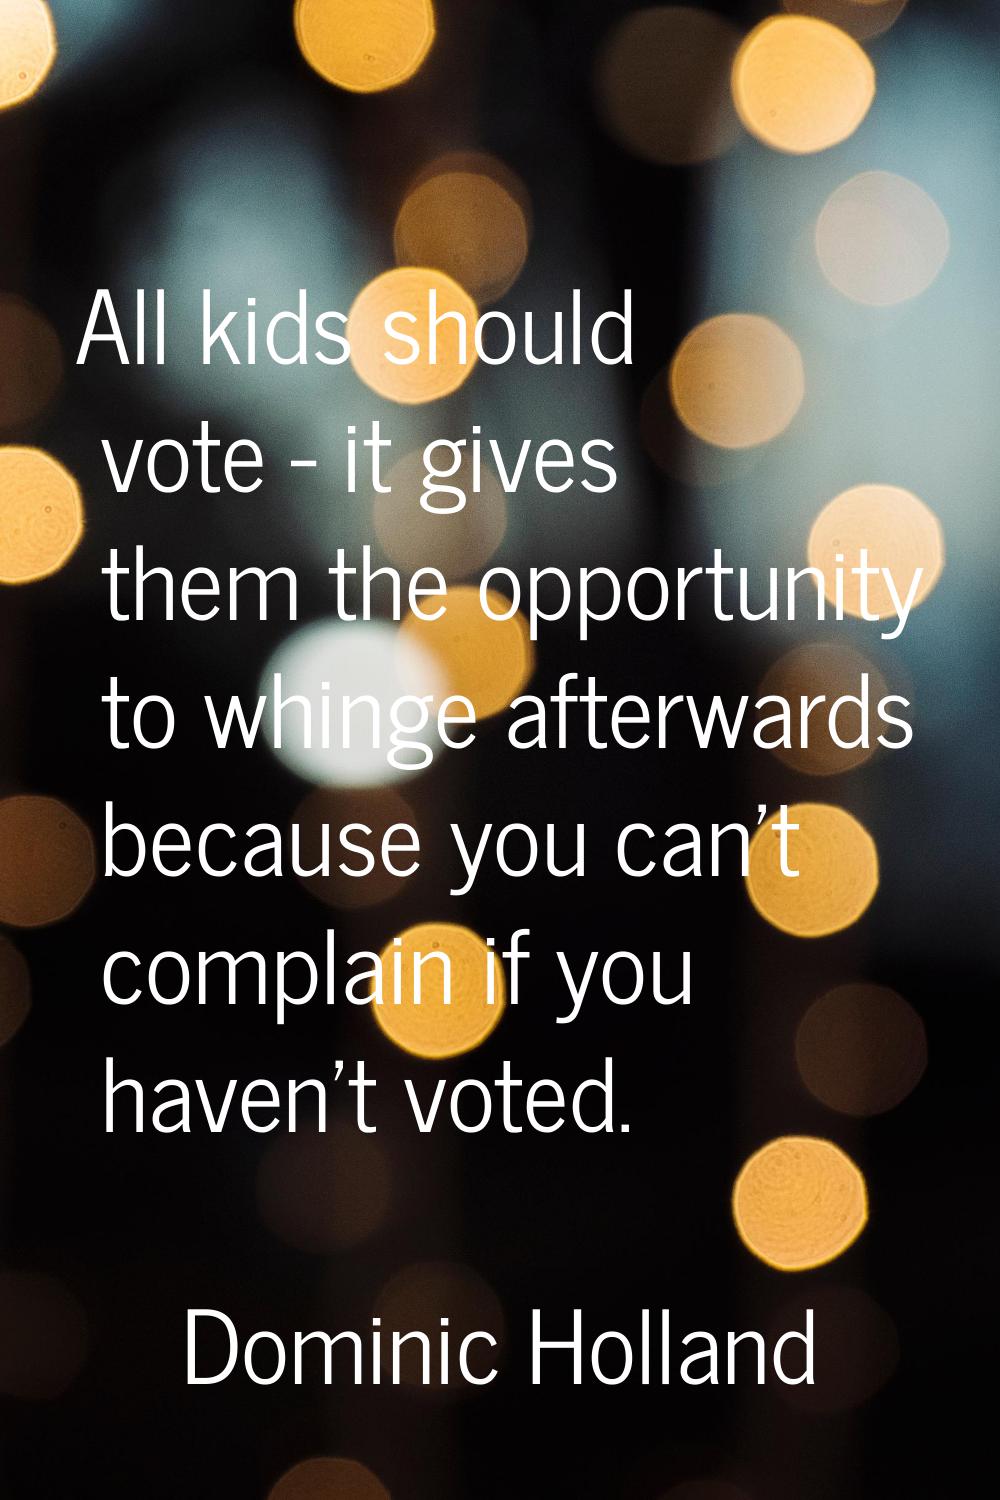 All kids should vote - it gives them the opportunity to whinge afterwards because you can't complai